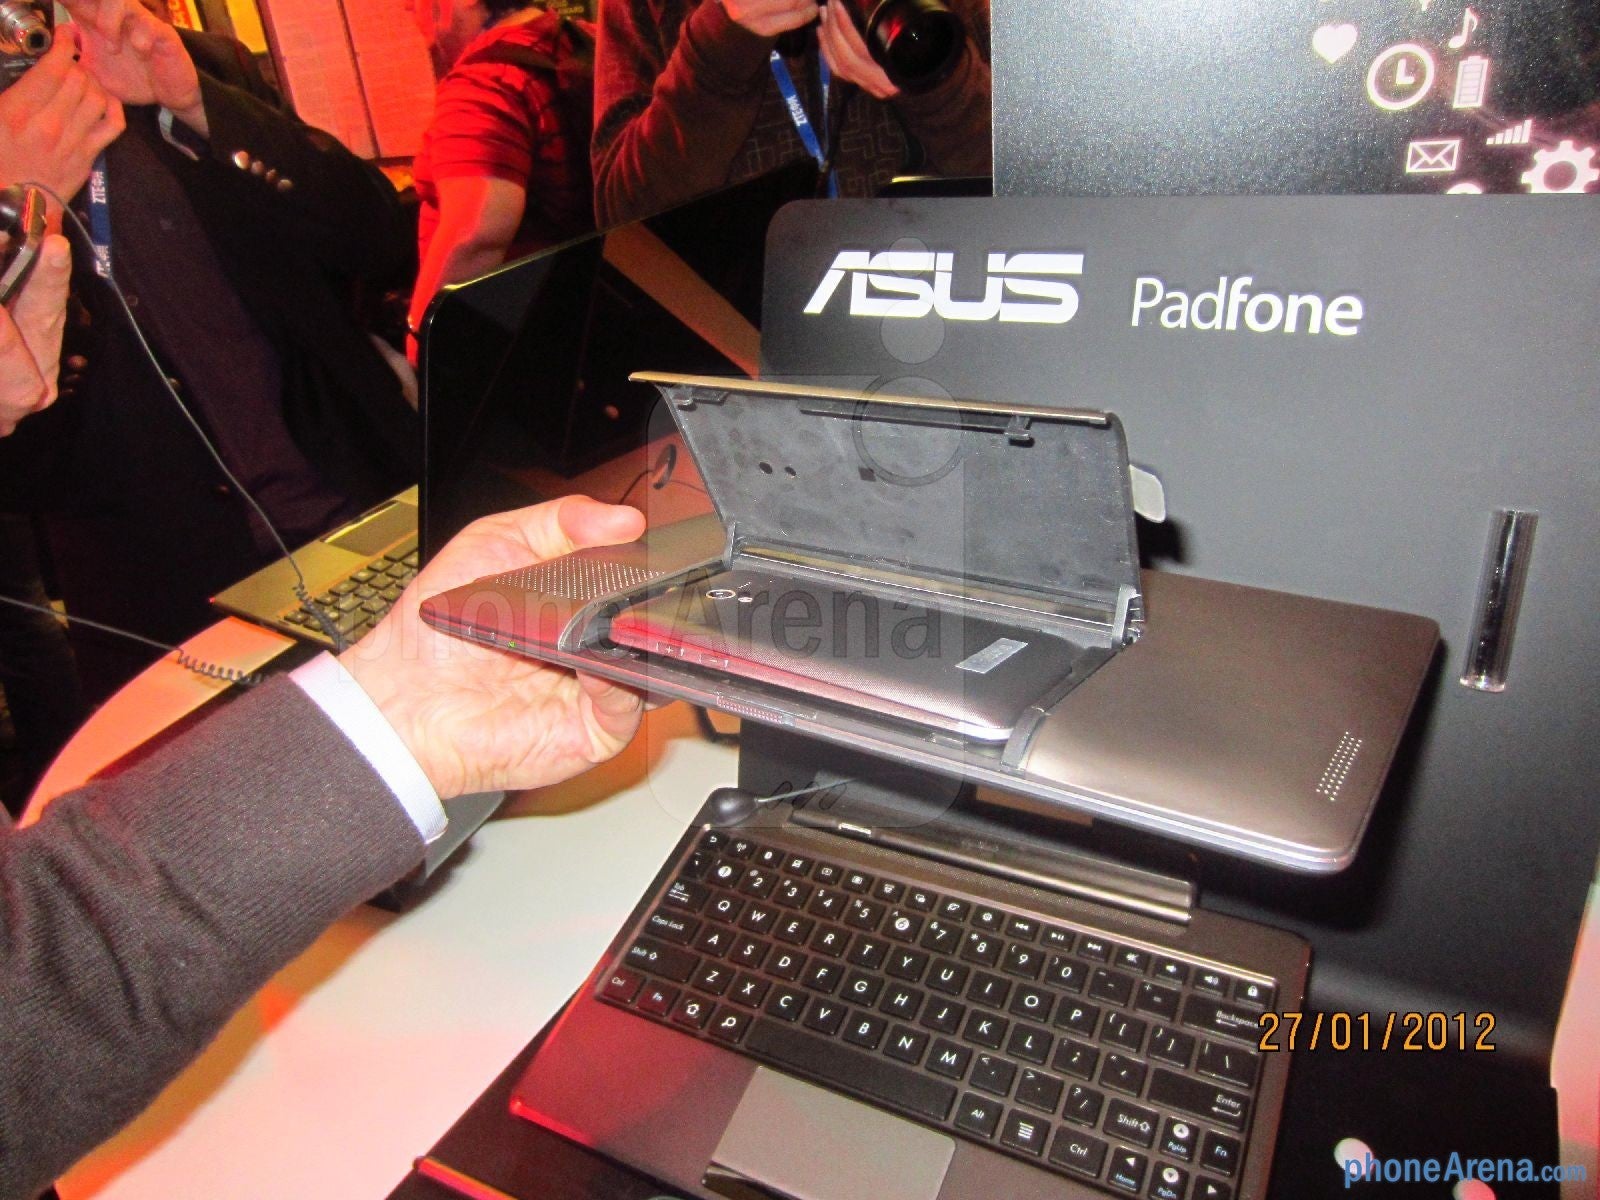 Asus Padfone - a versatile platform or just good engineering exercise?